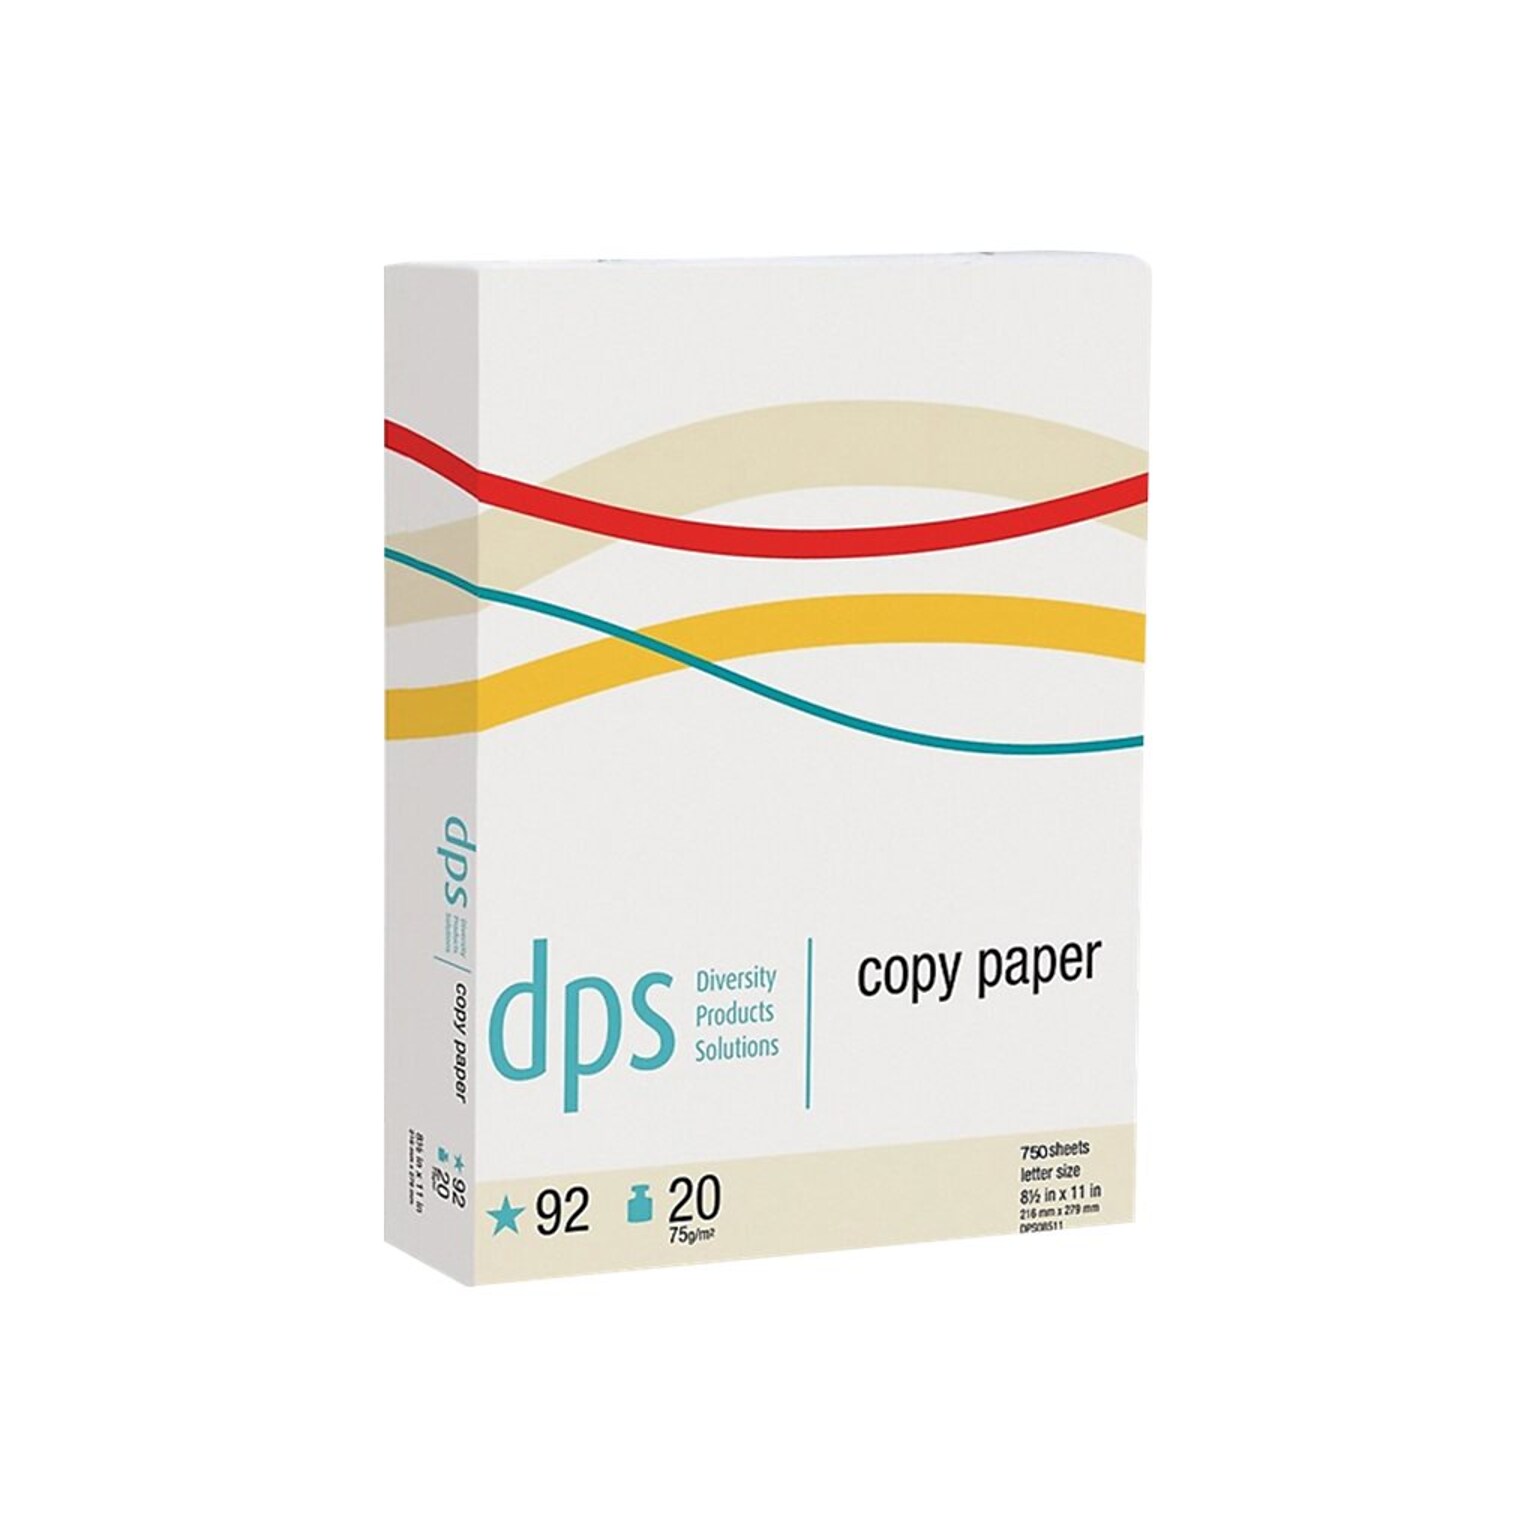 Diversity Products Solutions by Staples 8.5 x 11 Multipurpose Paper, 20 lbs., 92 Brightness, 750 Sheets/Ream